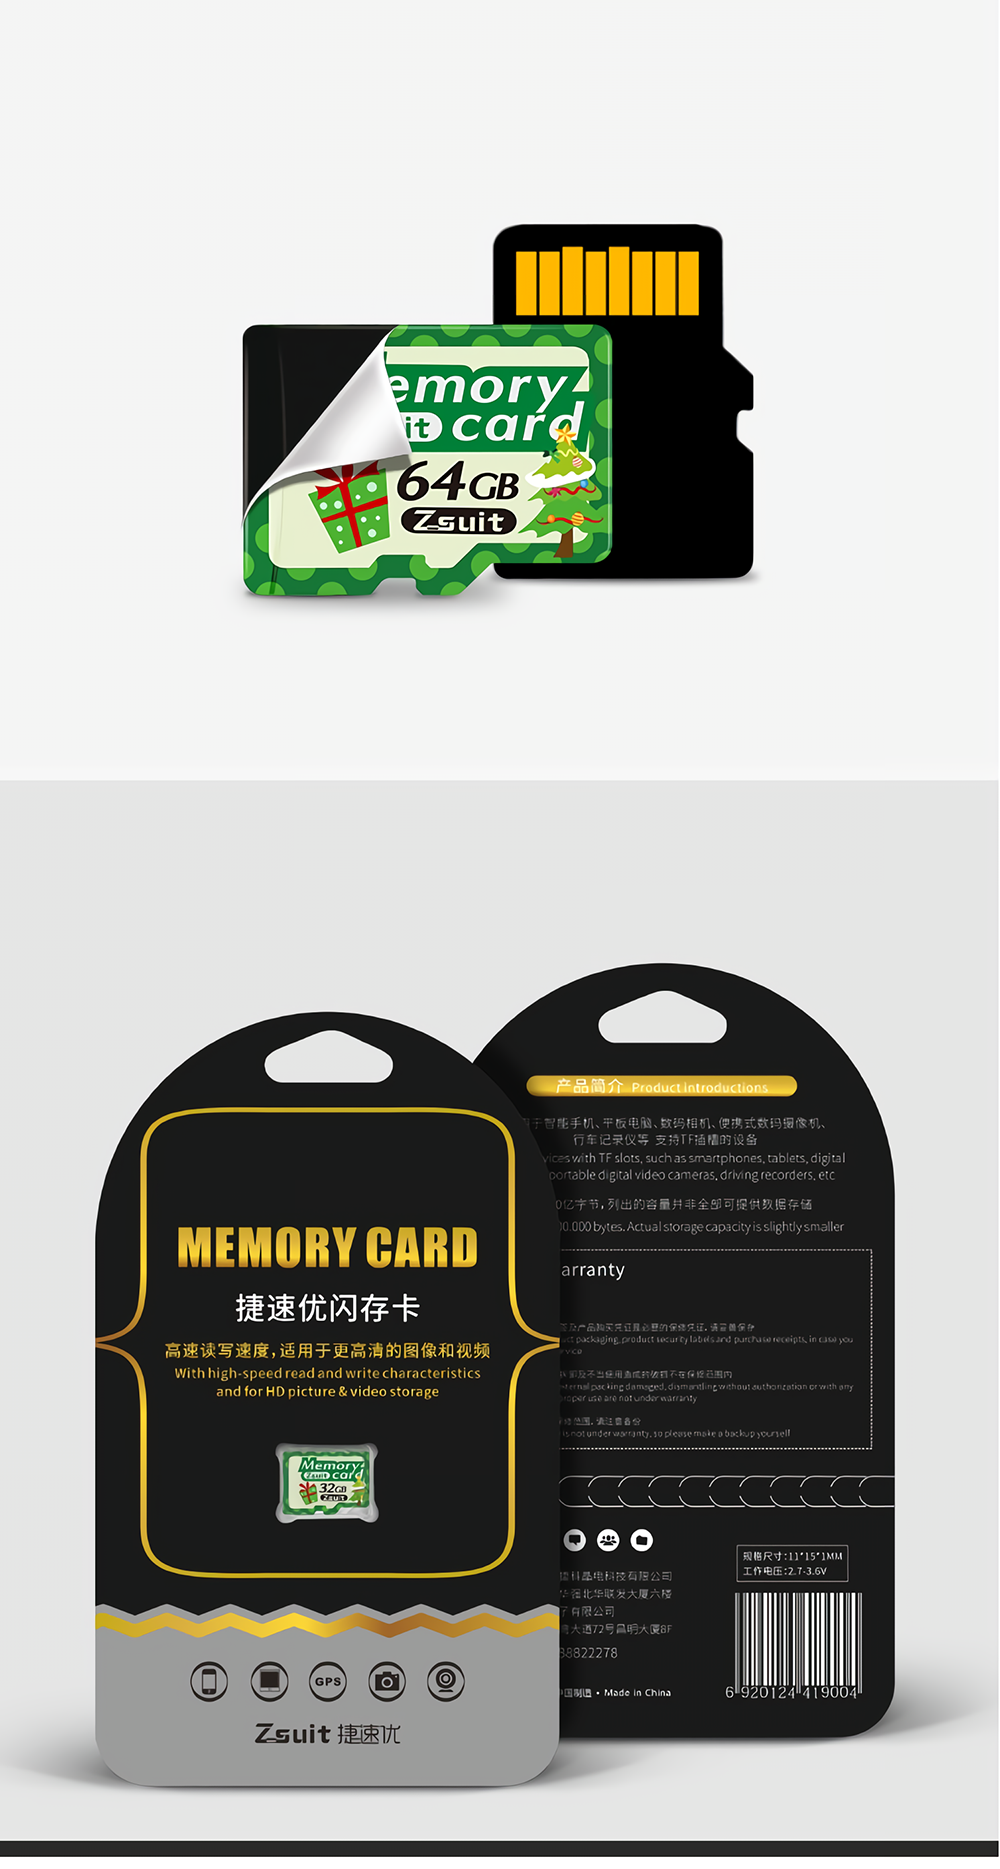 z-suit-Christmas-Style-C10-Memory-Card-U3-UHS-1-TF-Card-16G-32G-64G-High-Speed-Storage-Flash-Card-1923175-5